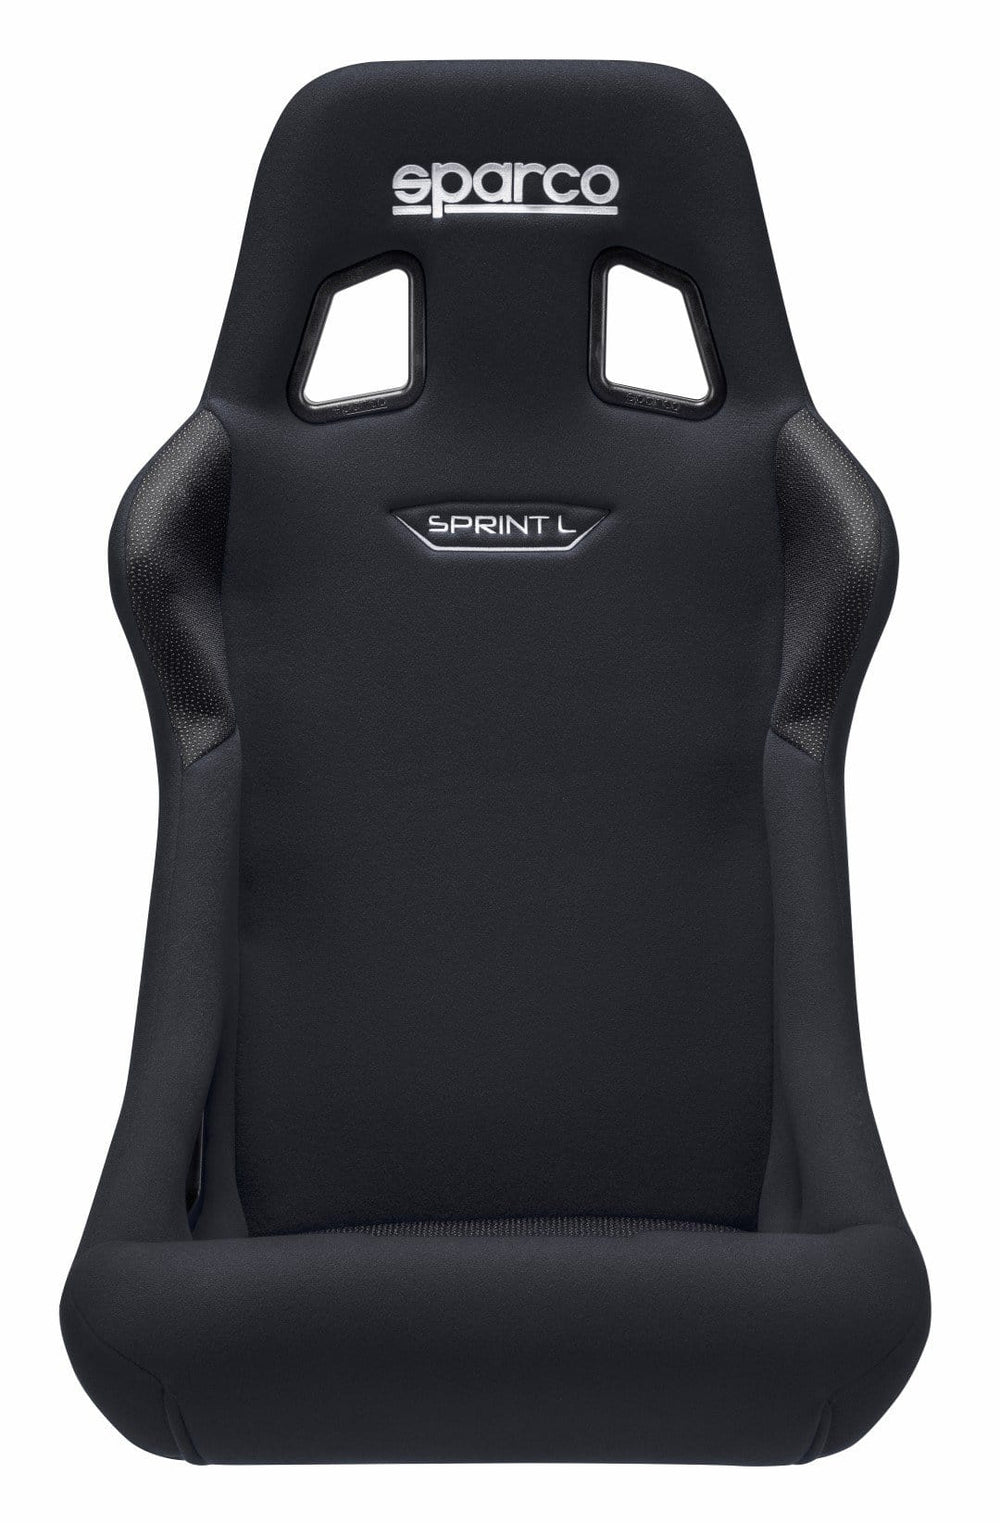 Sparco Sprint Seat (Large) Black - Universal - Dirty Racing Products